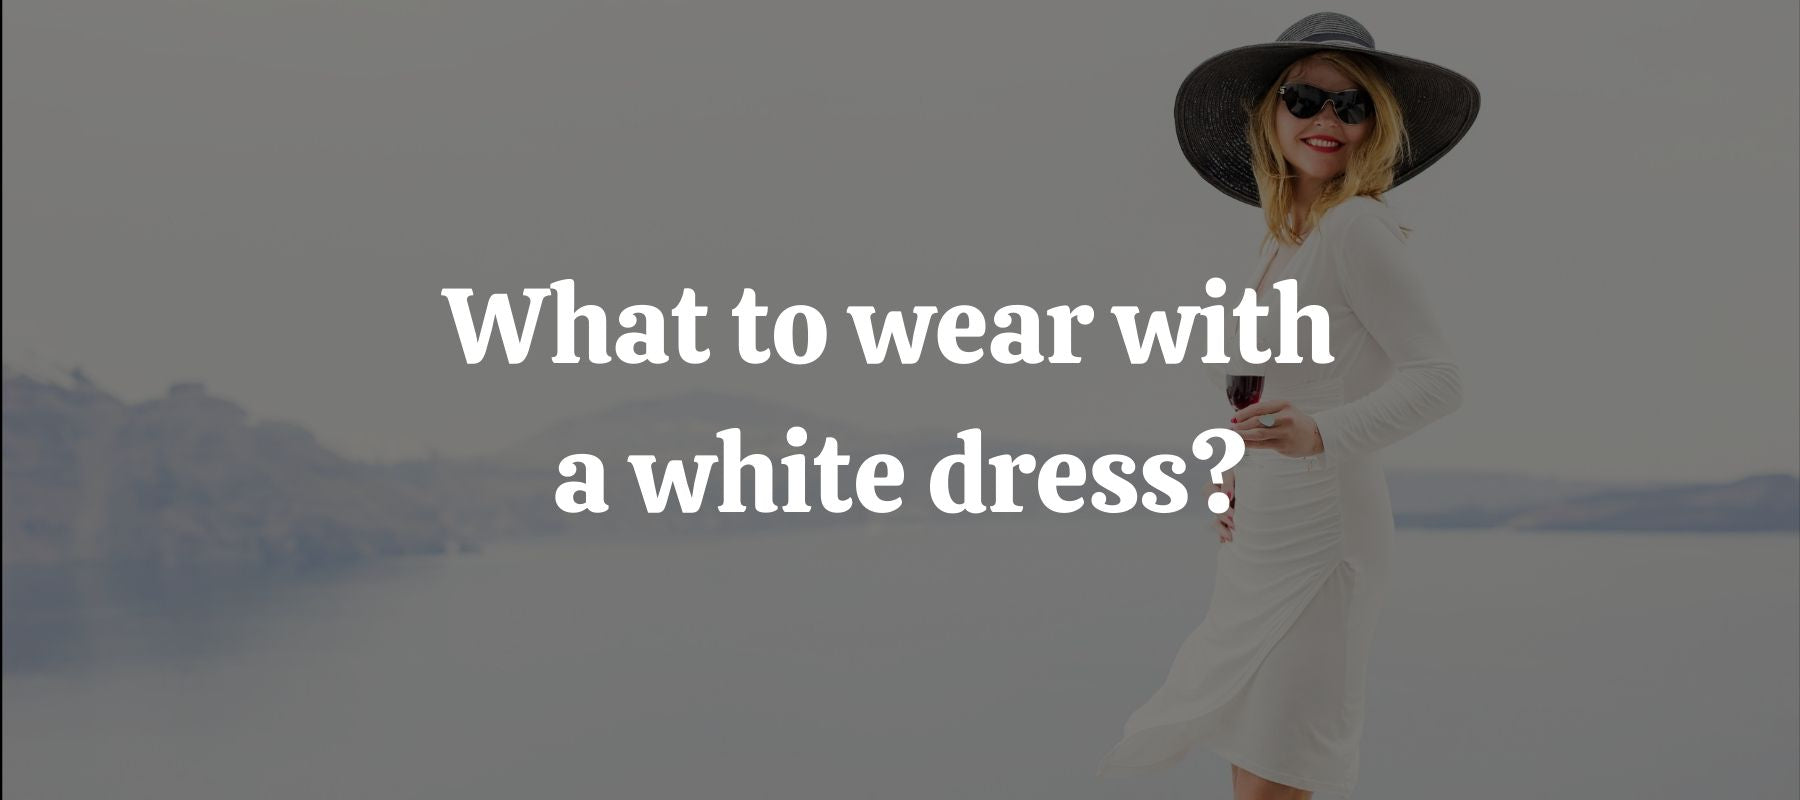 What to wear with a white dress